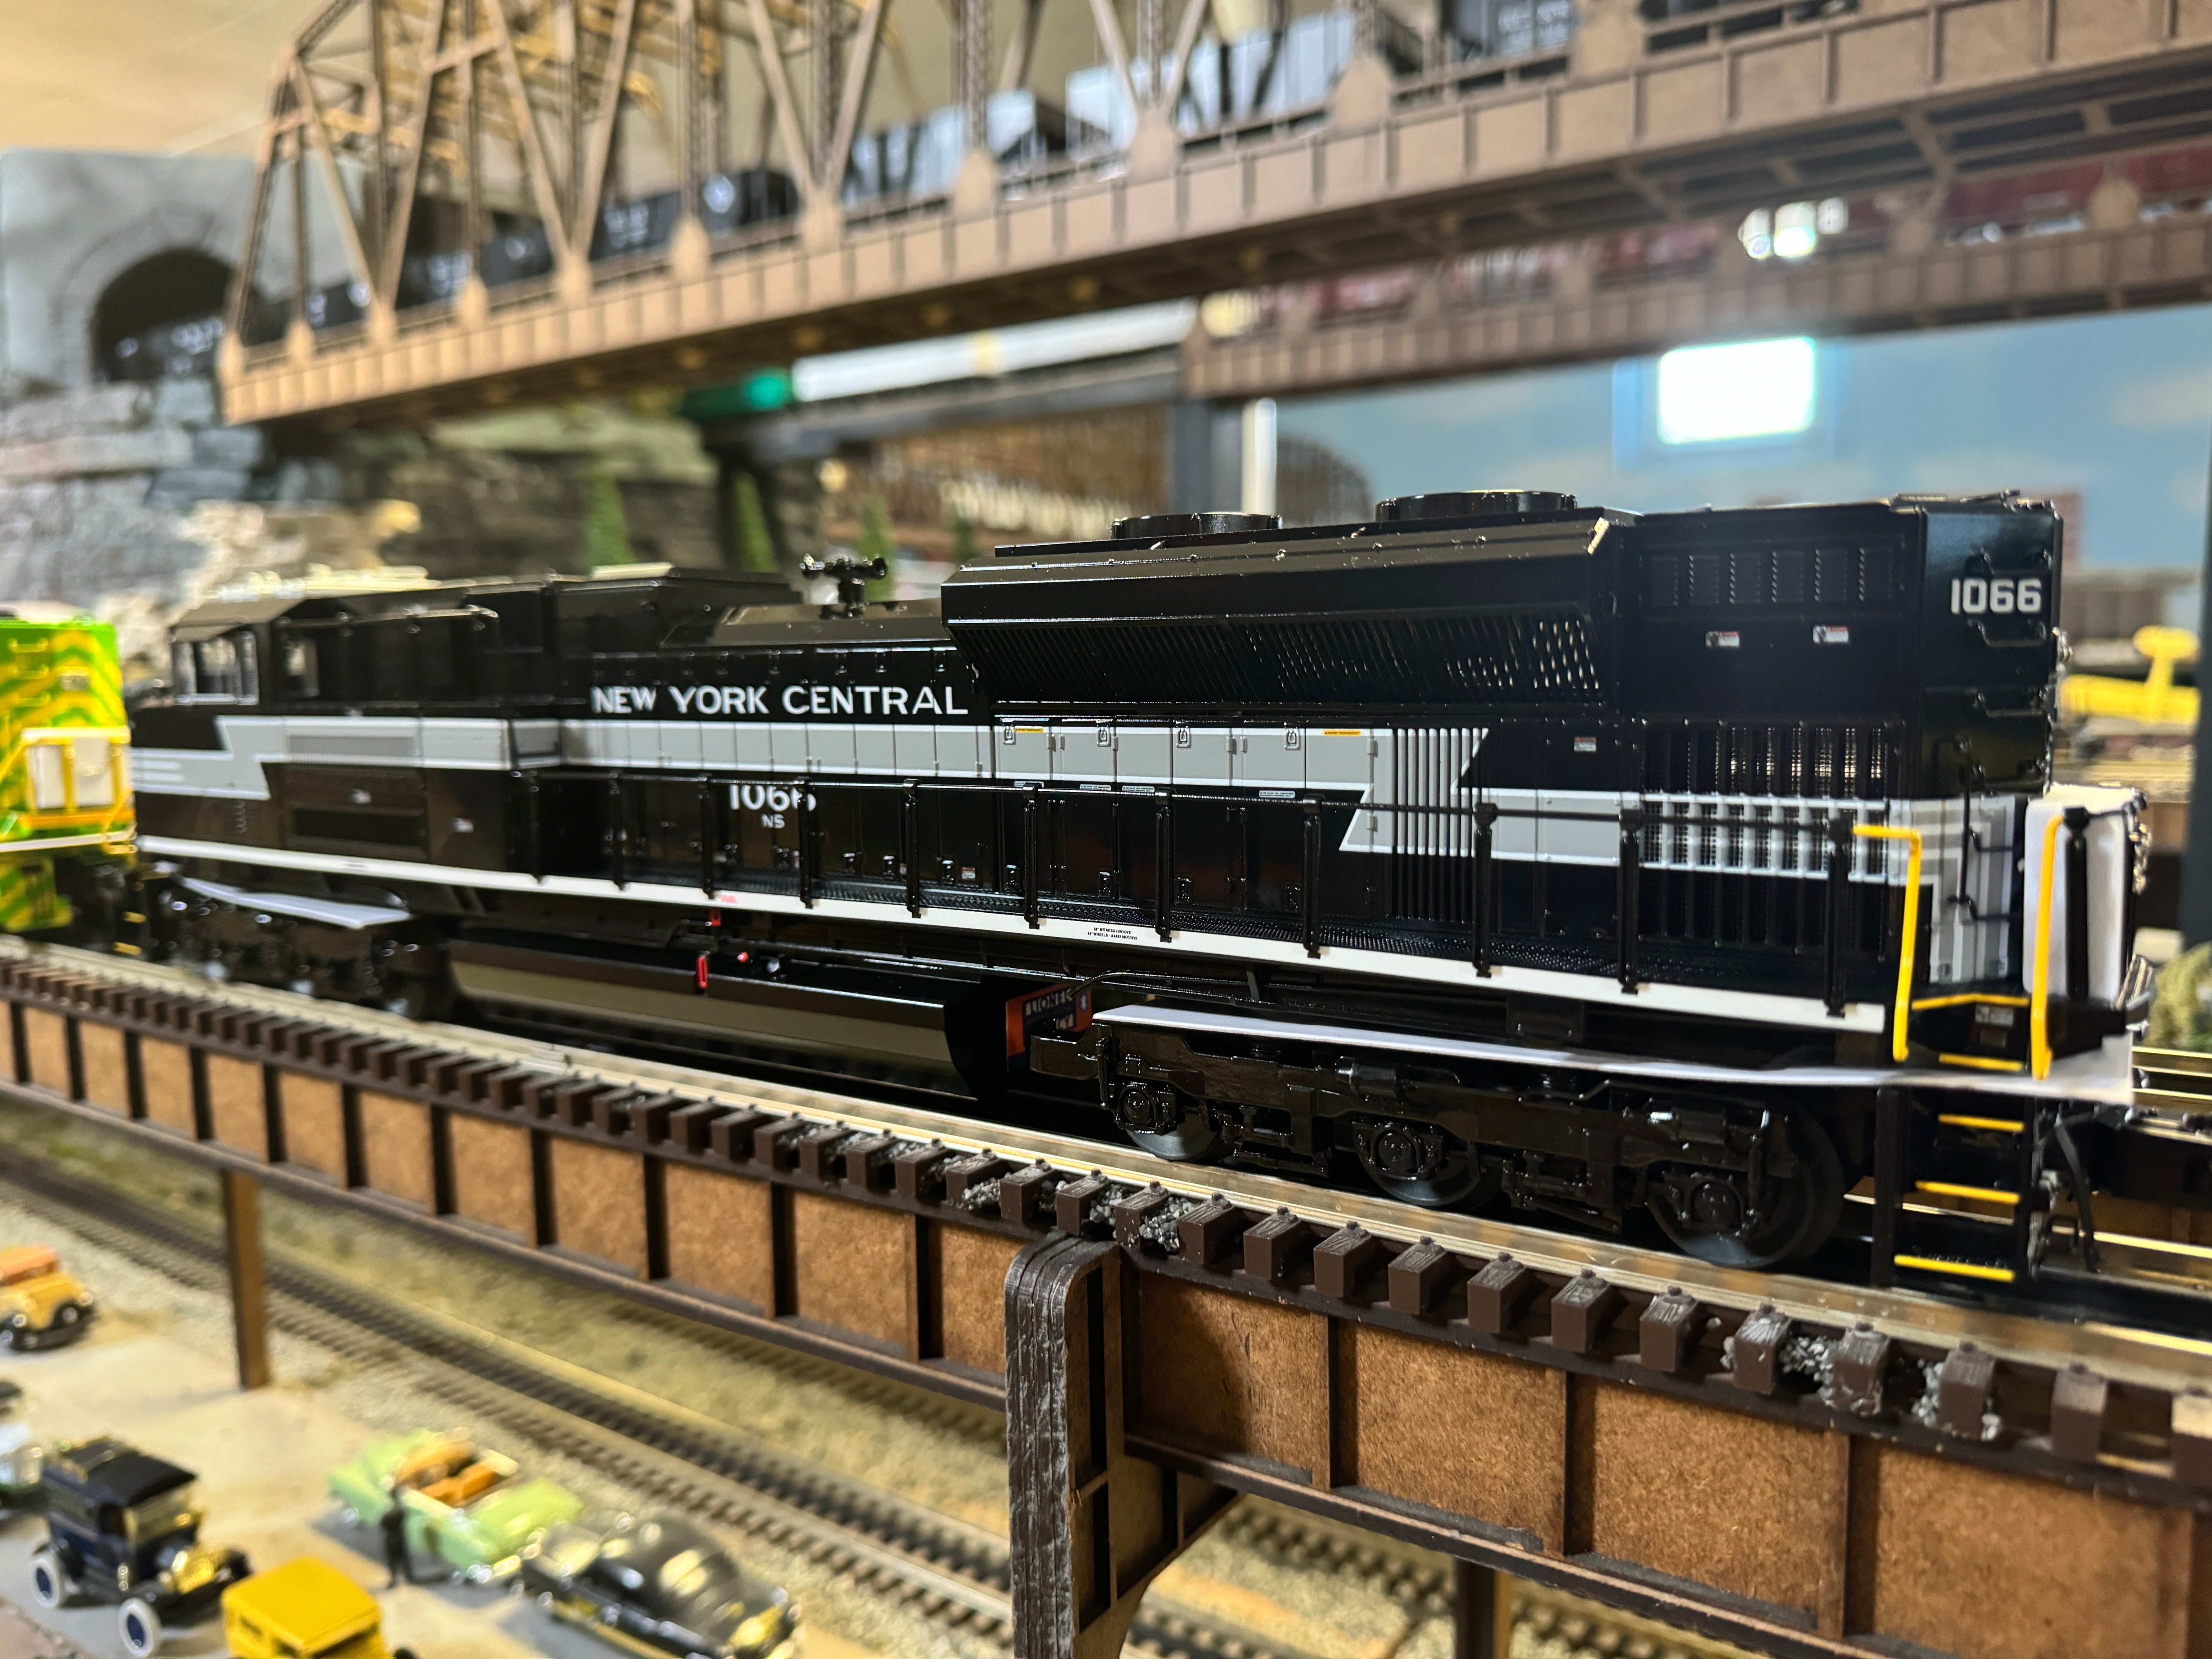 Lionel 2433080 - Legacy SD70ACE Diesel Engine "New York Central" #1066 (Norfolk Southern)